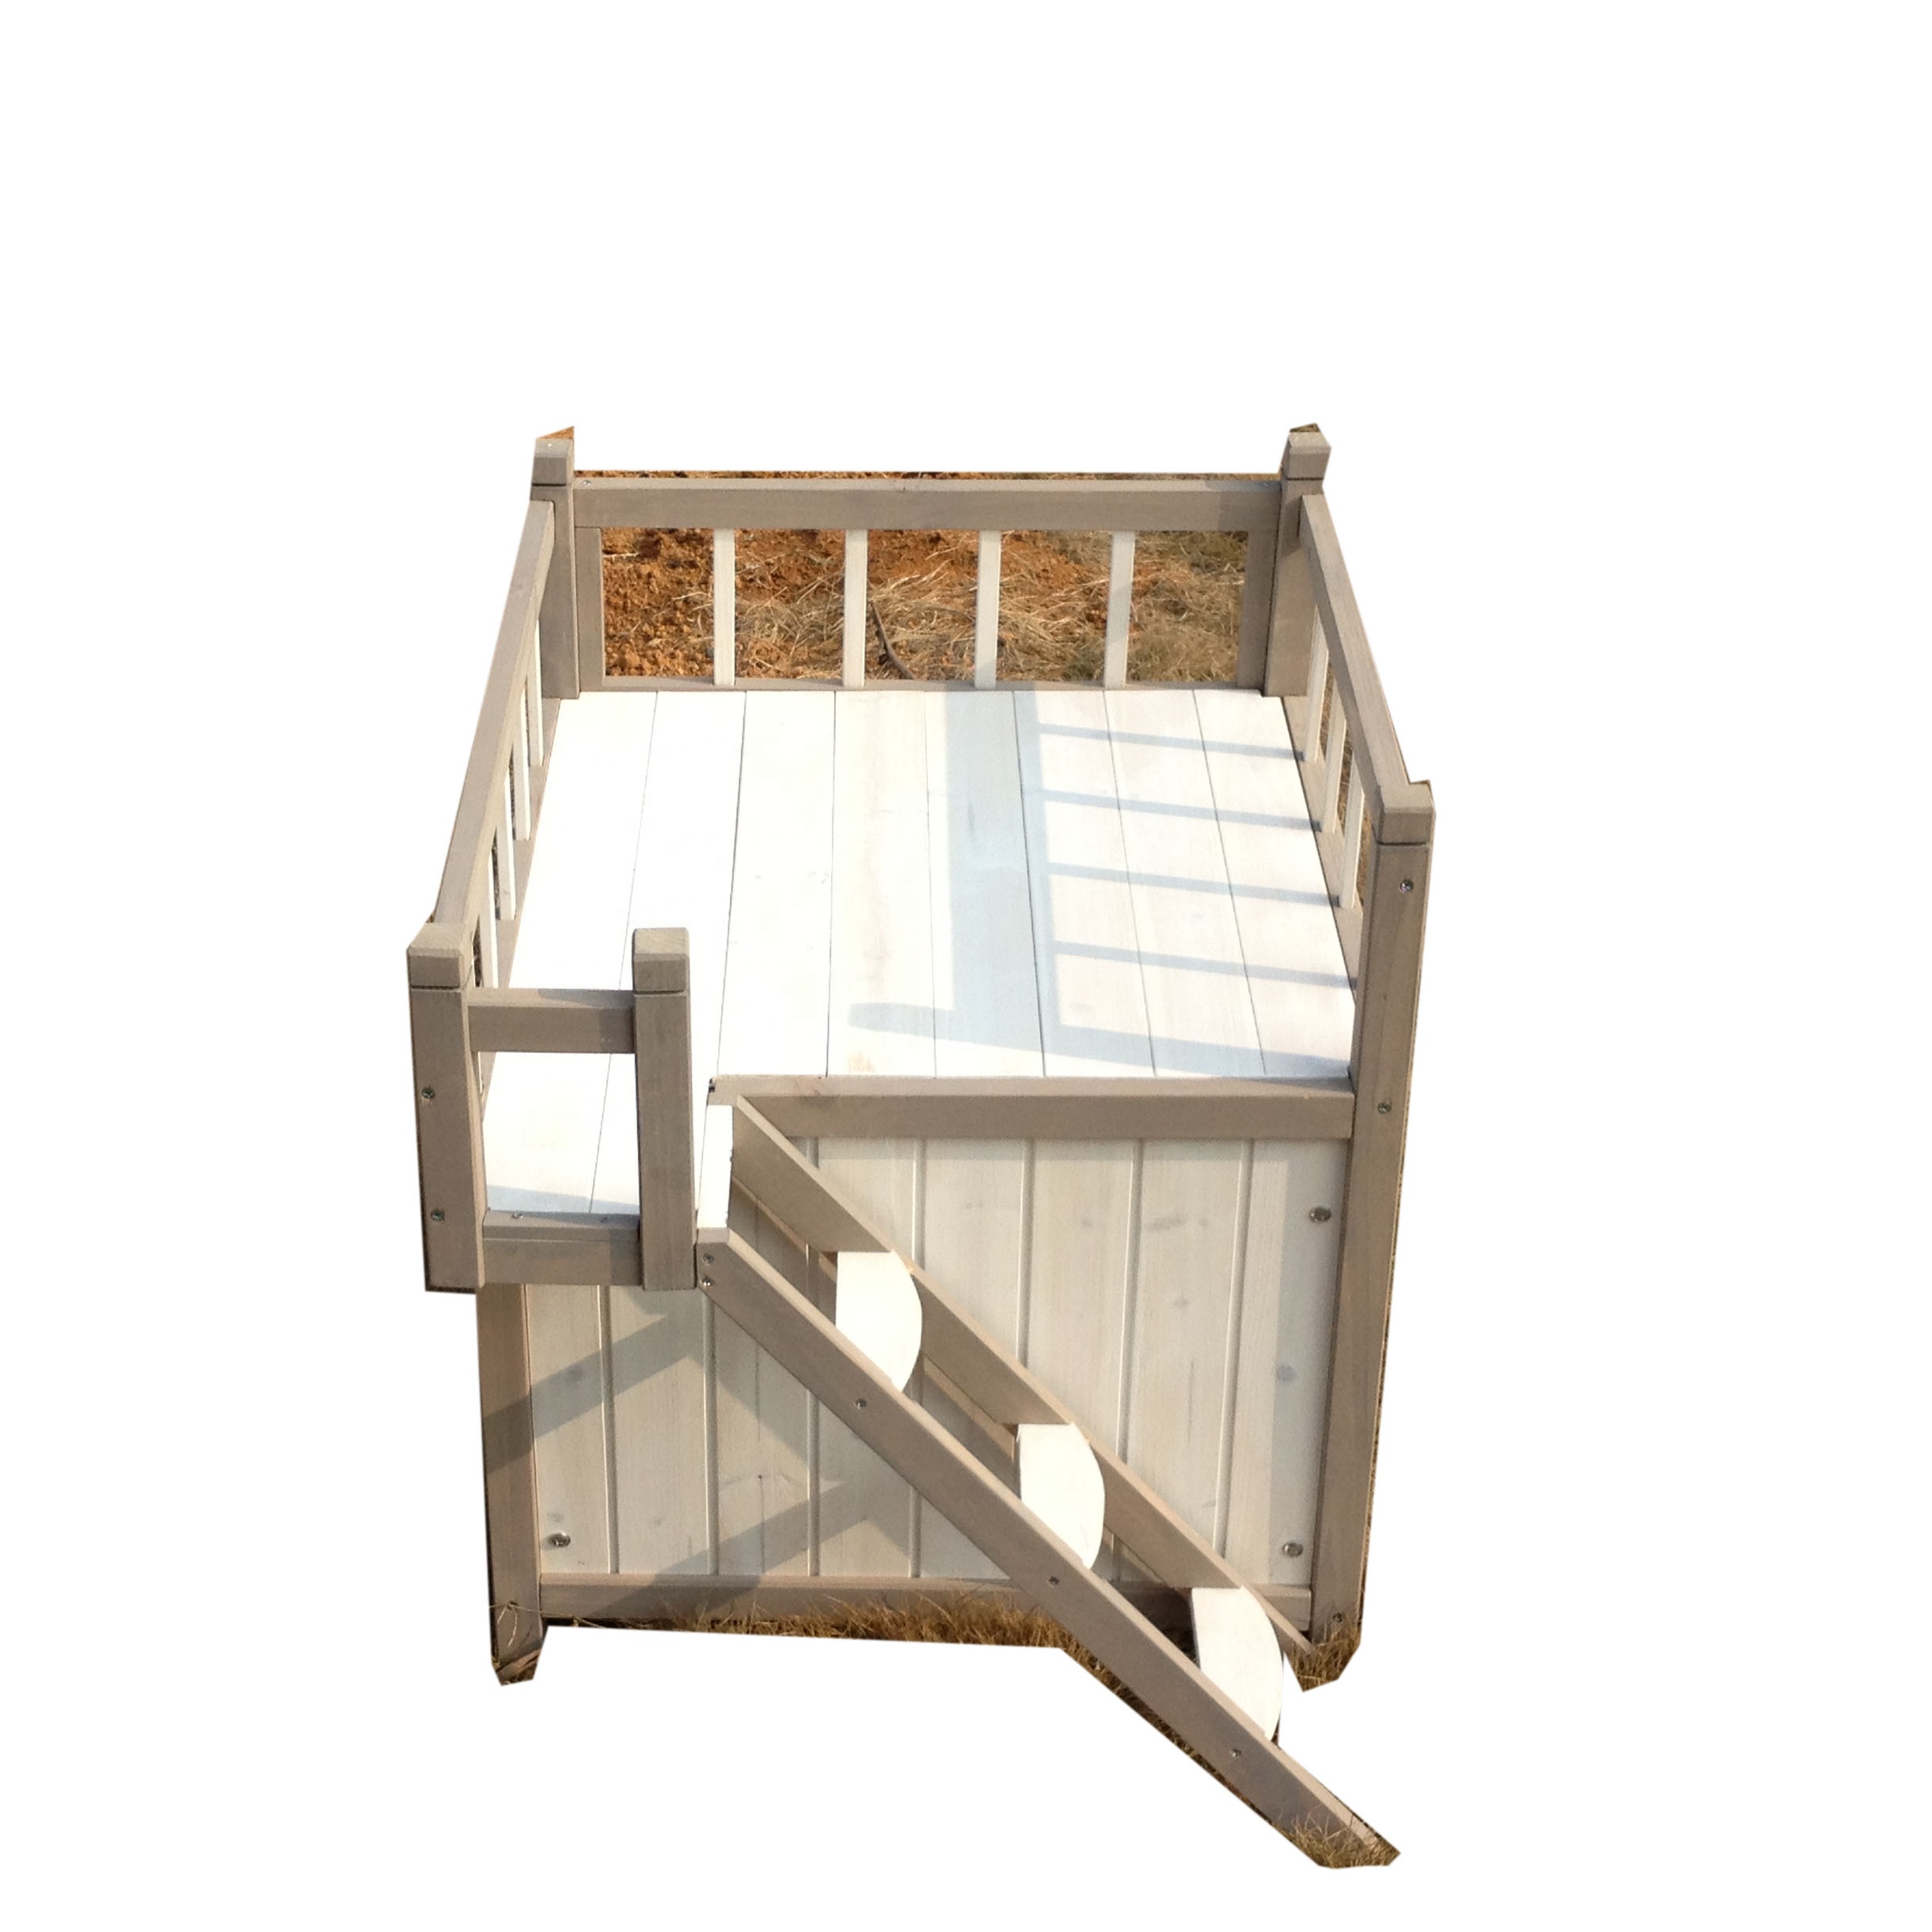 new Design wooden small animals kennel cheap dog cage wholesale with Stairs pet Insulated